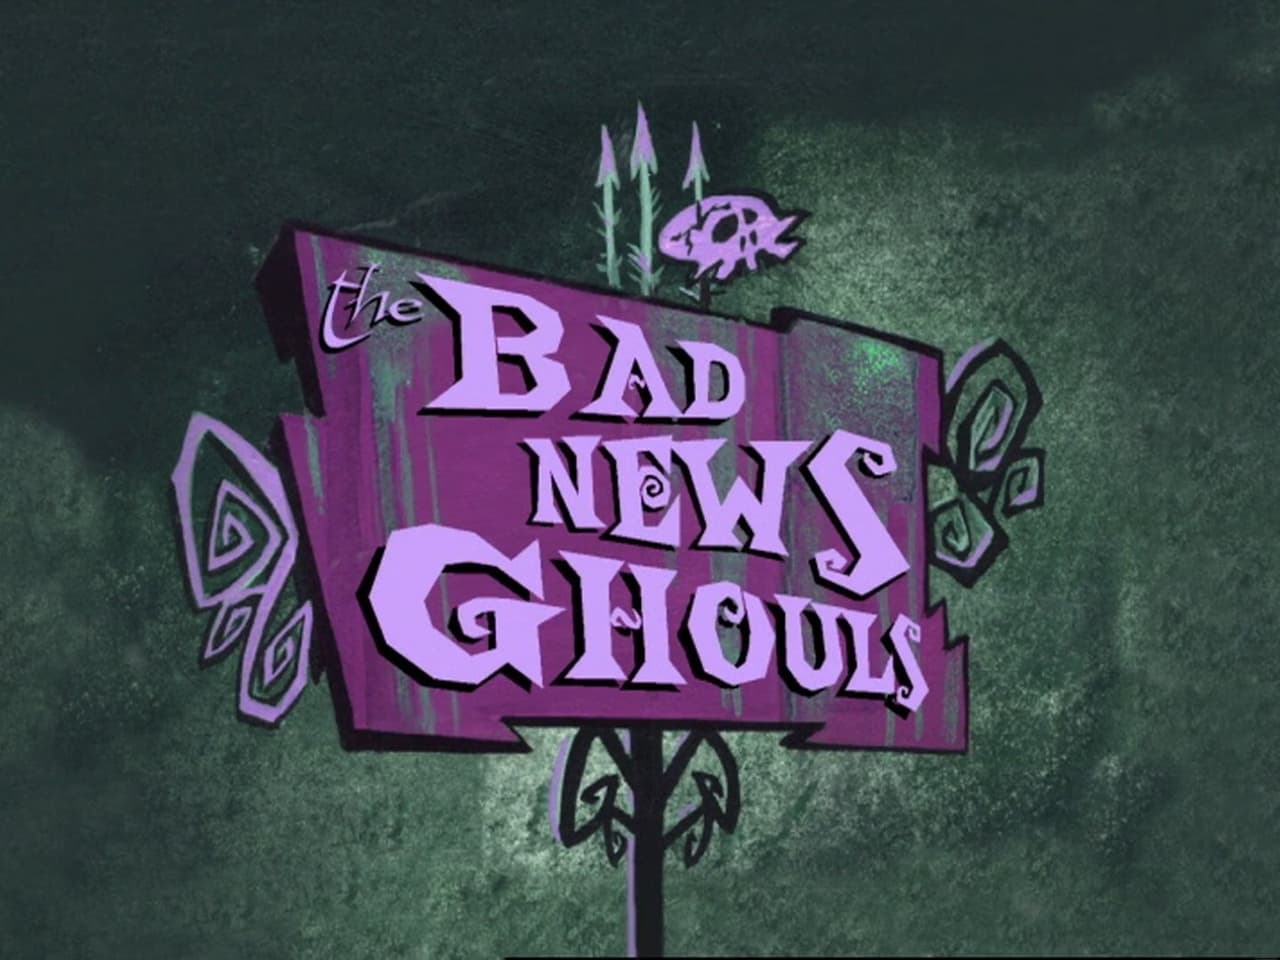 The Grim Adventures of Billy and Mandy - Season 4 Episode 4 : The Bad News Ghouls